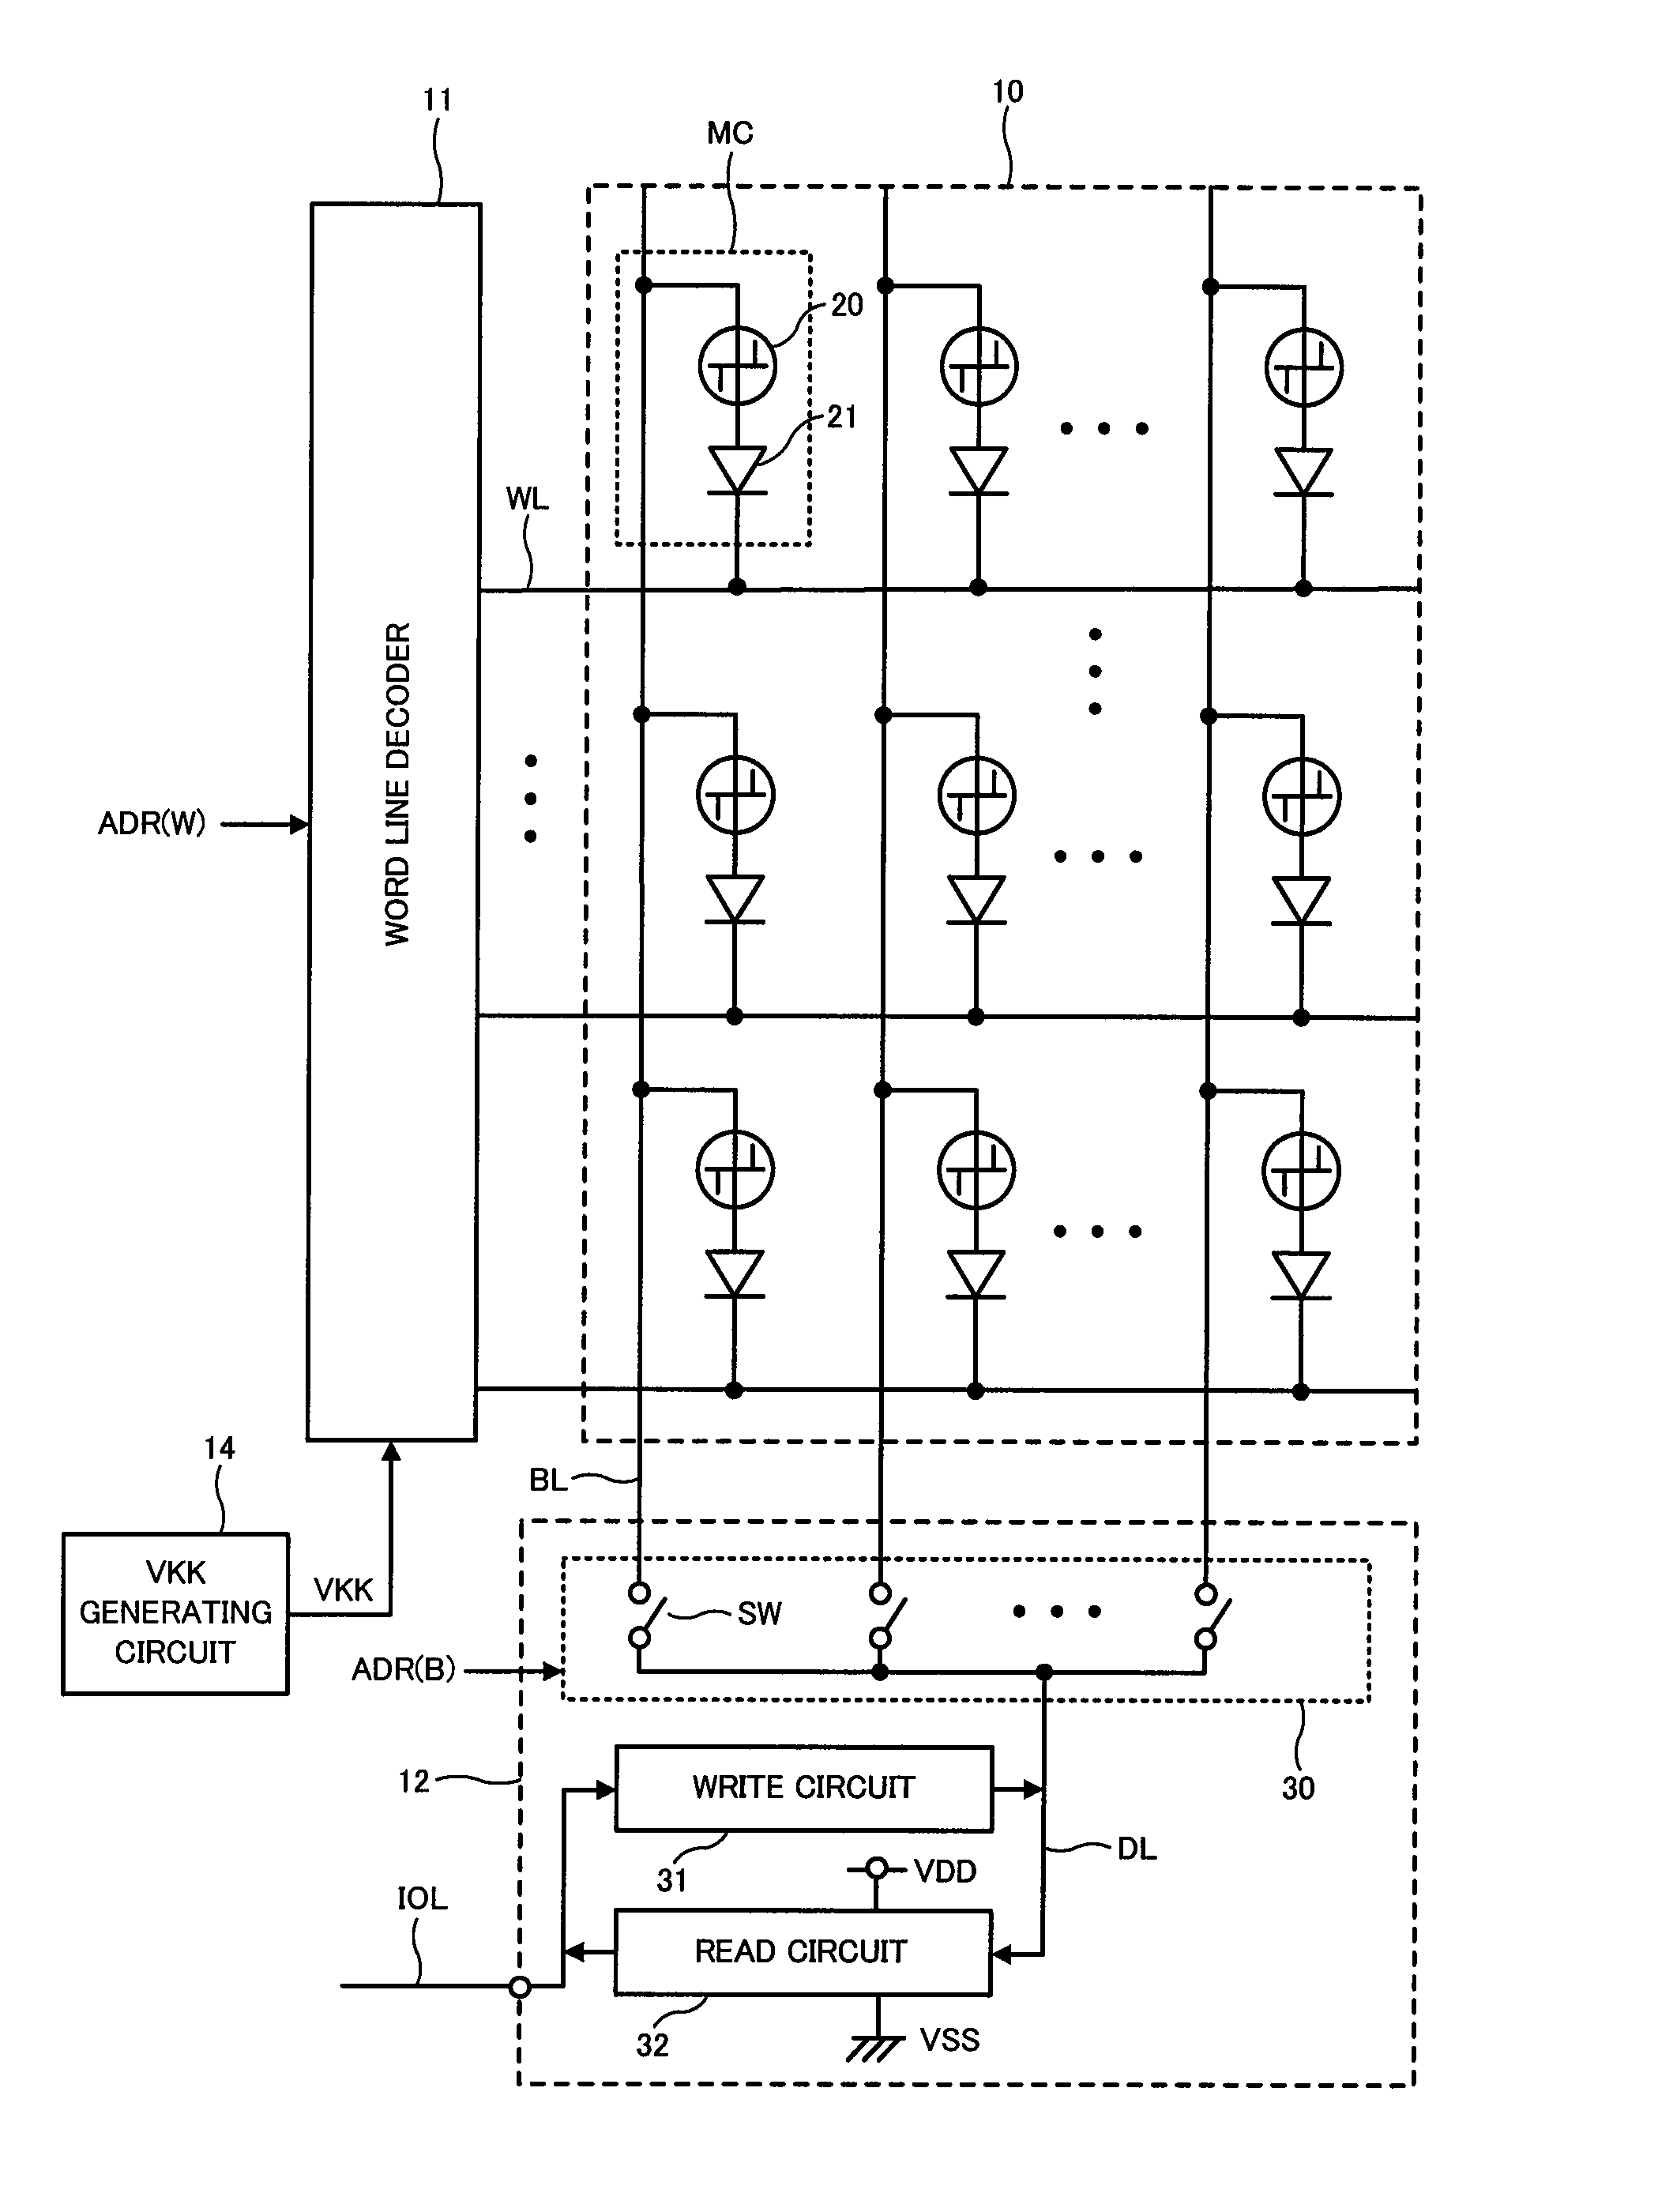 Semiconductor memory device having diode cell structure